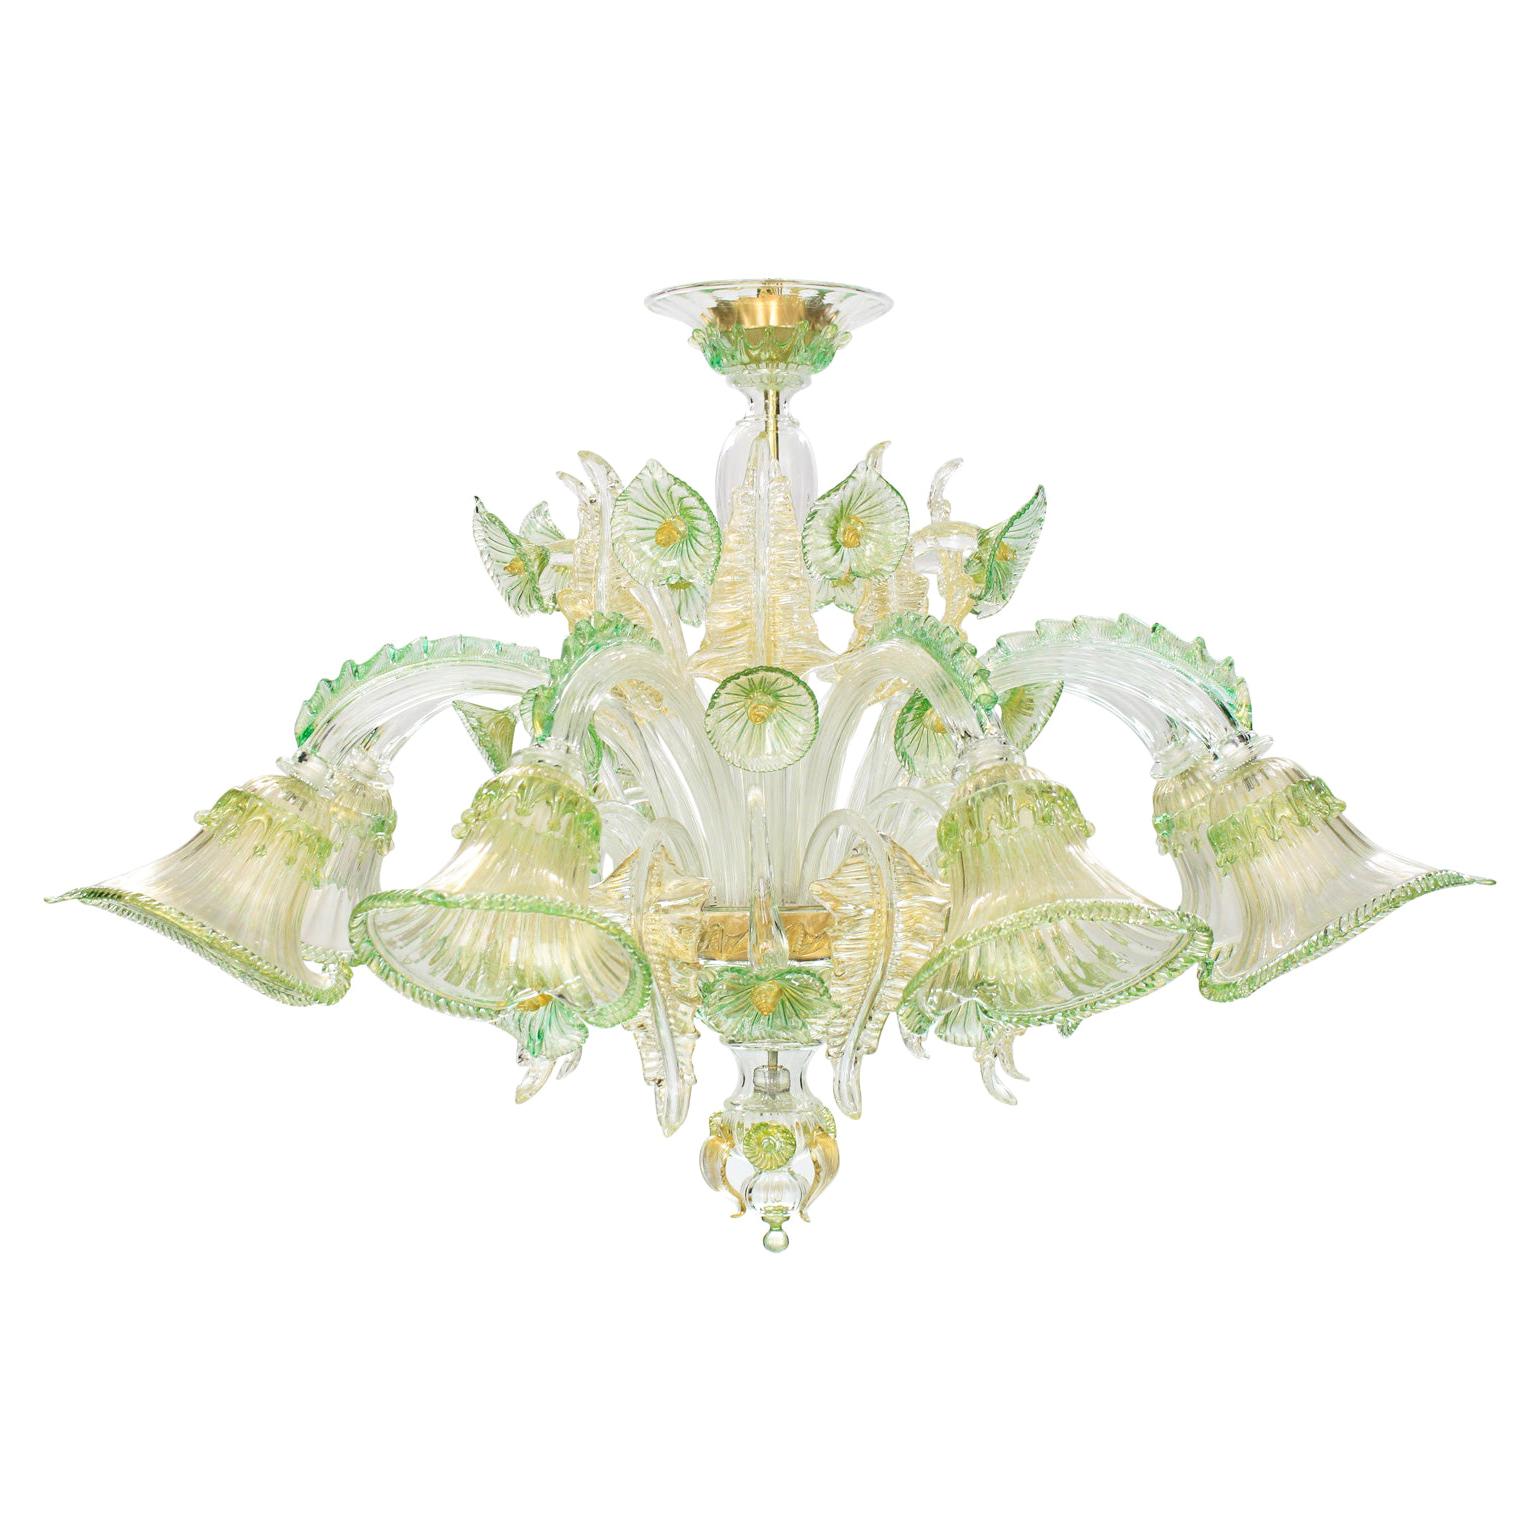 Artistic Ceiling Lamp 8 Arms, Crystal, Green, Gold Murano Glass by Multiforme